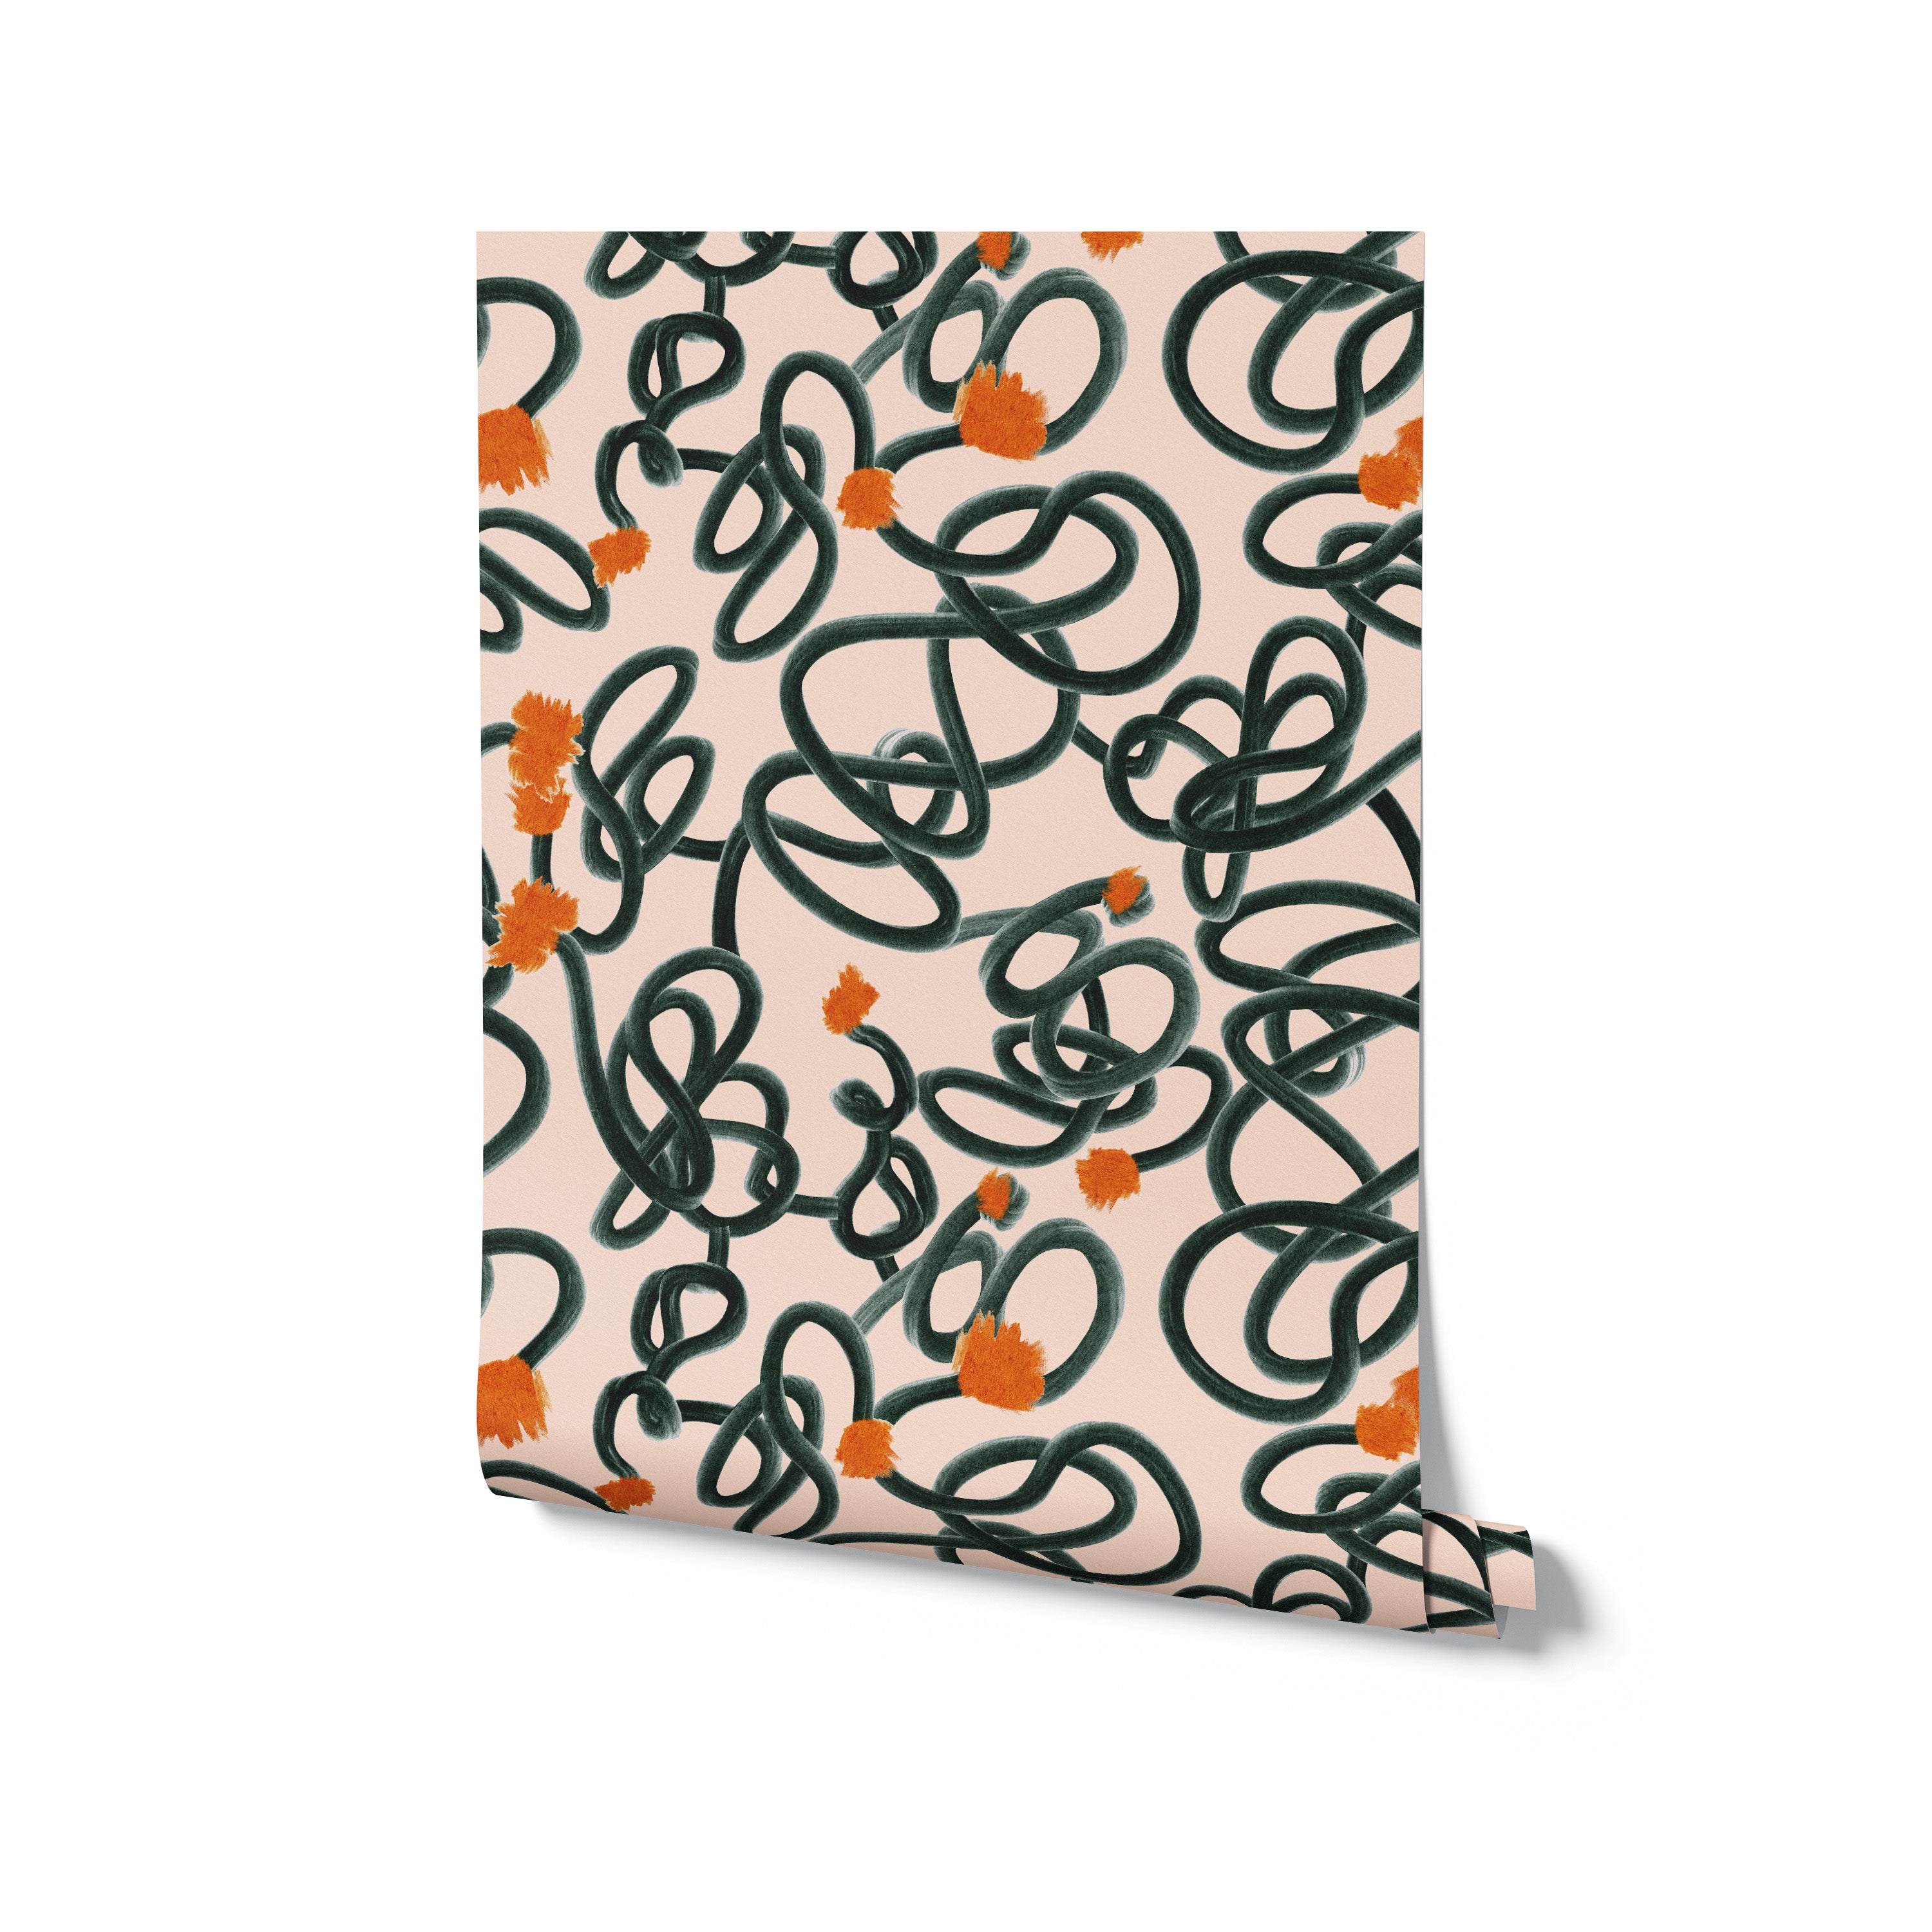 Rolled up view of Abstract Scribble Wallpaper showing off its chaotic yet charming pattern of dark green loops and orange blooms against a peach-colored background, ready to bring a lively and artistic vibe to any interior space.